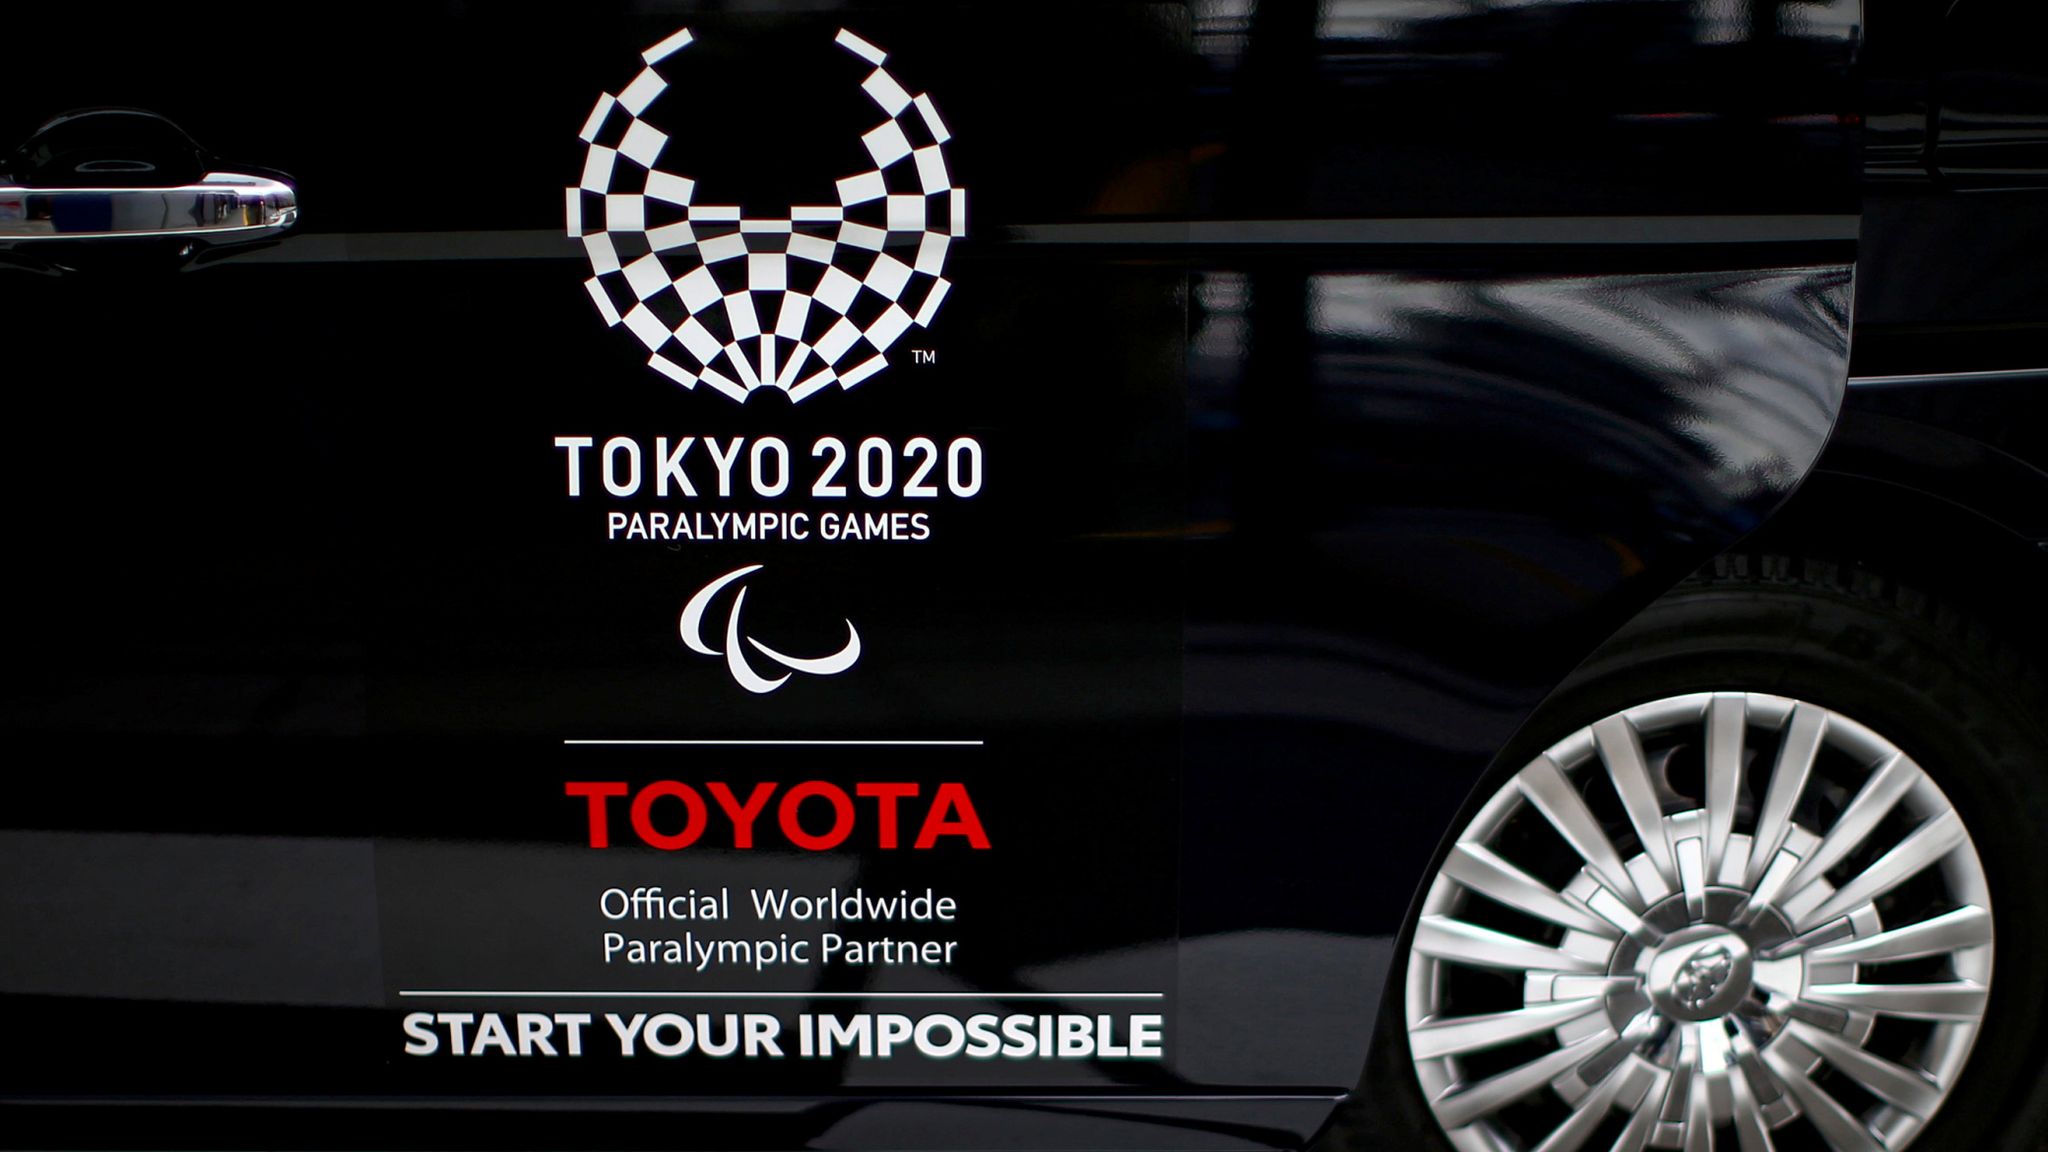 Tokyo Olympics Major sponsor Toyota won't air Games ads or attend